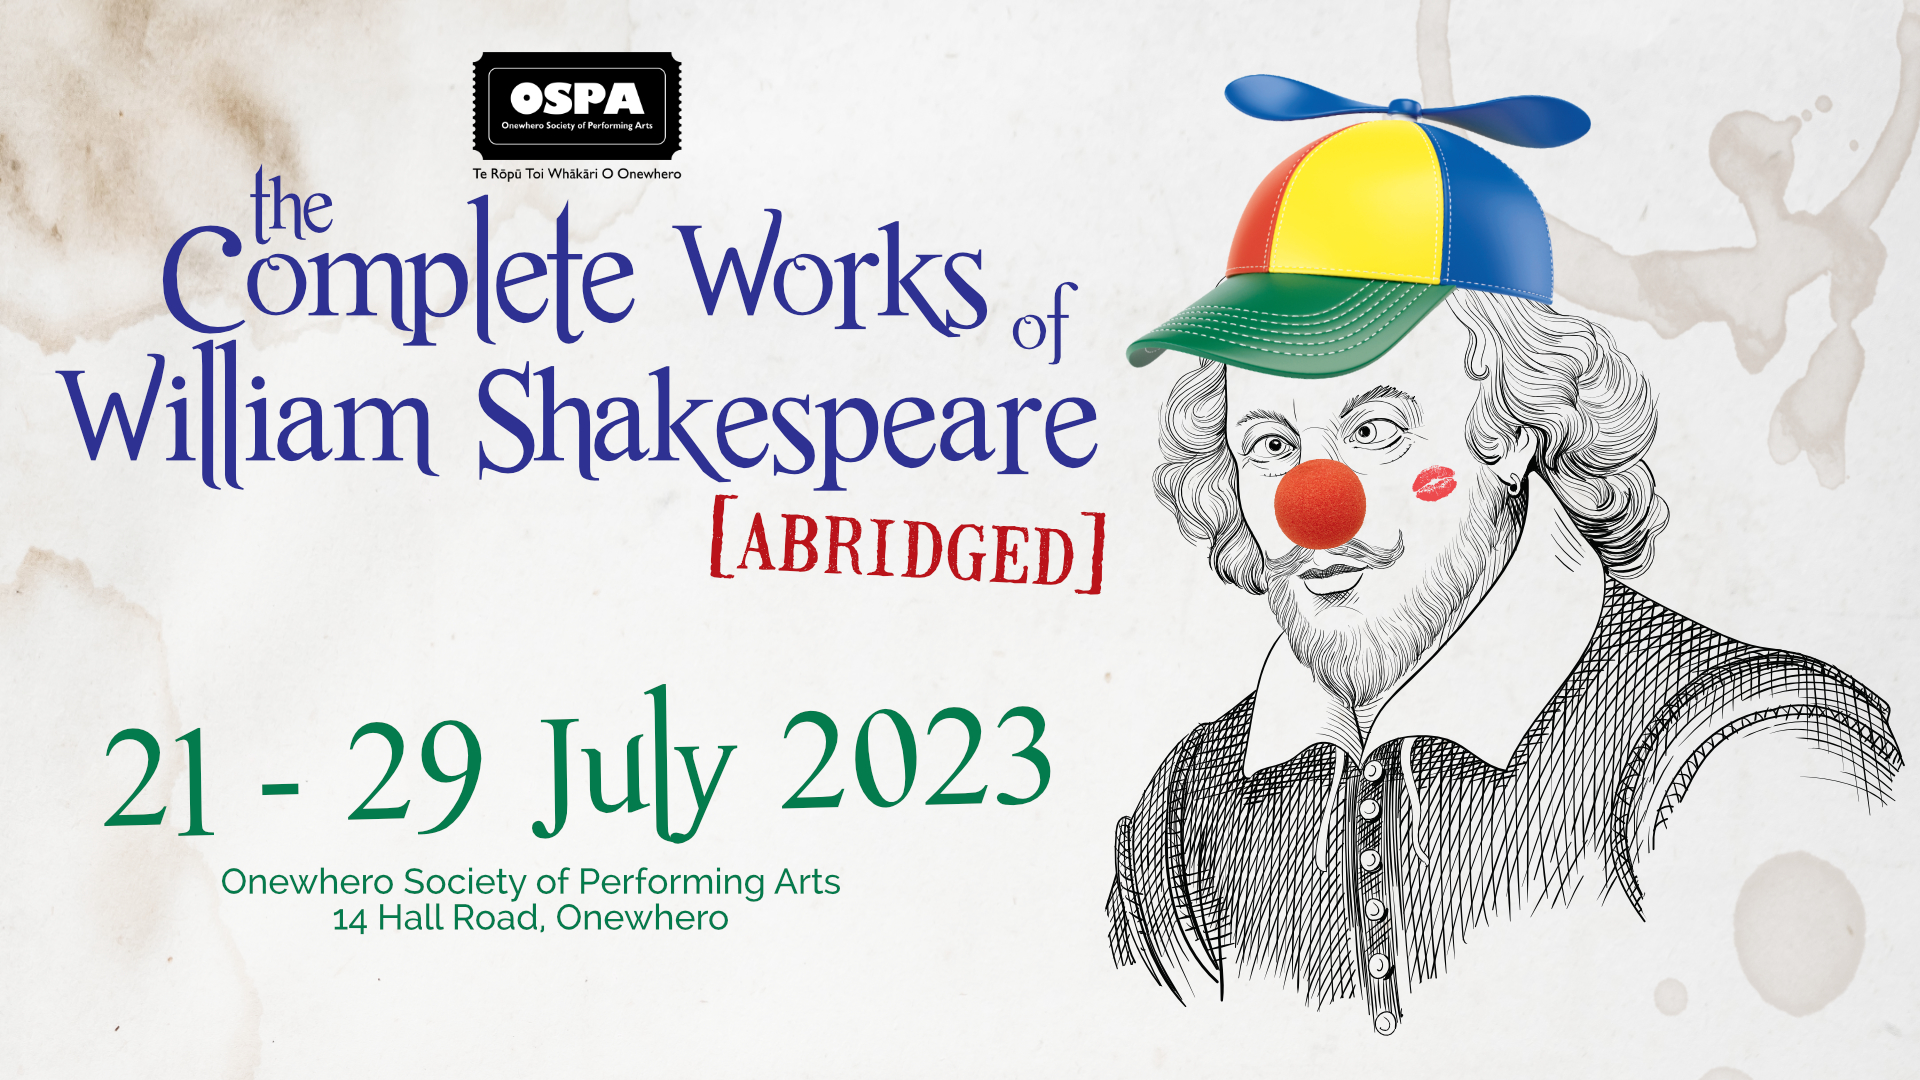 The Complete Works of William Shakespeare [Abridged]